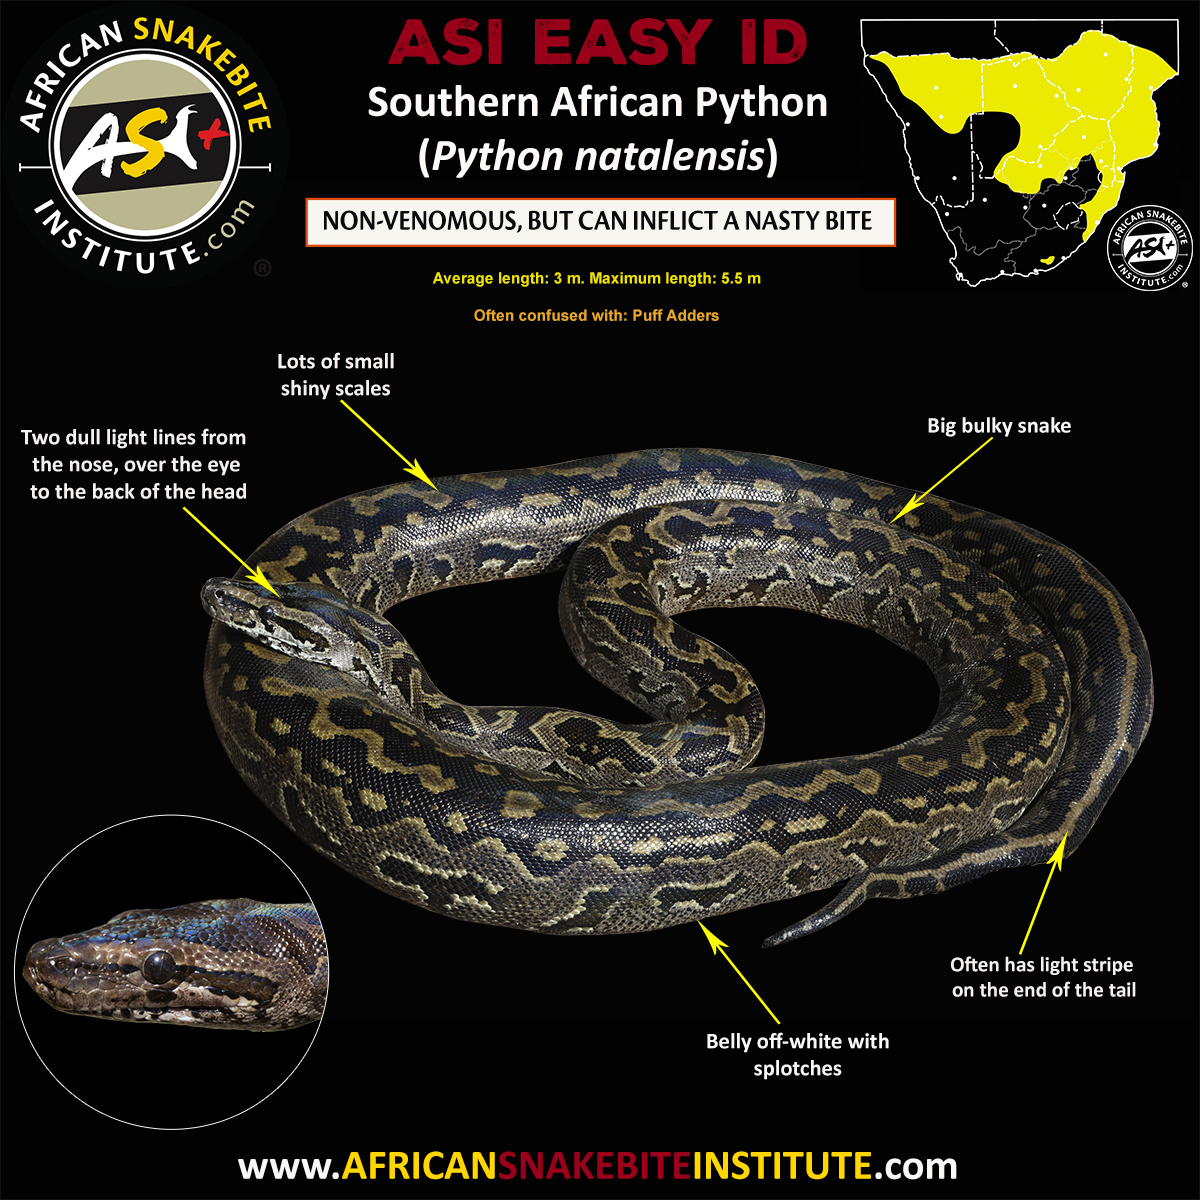 African Rock Python – Florida Snake ID Guide